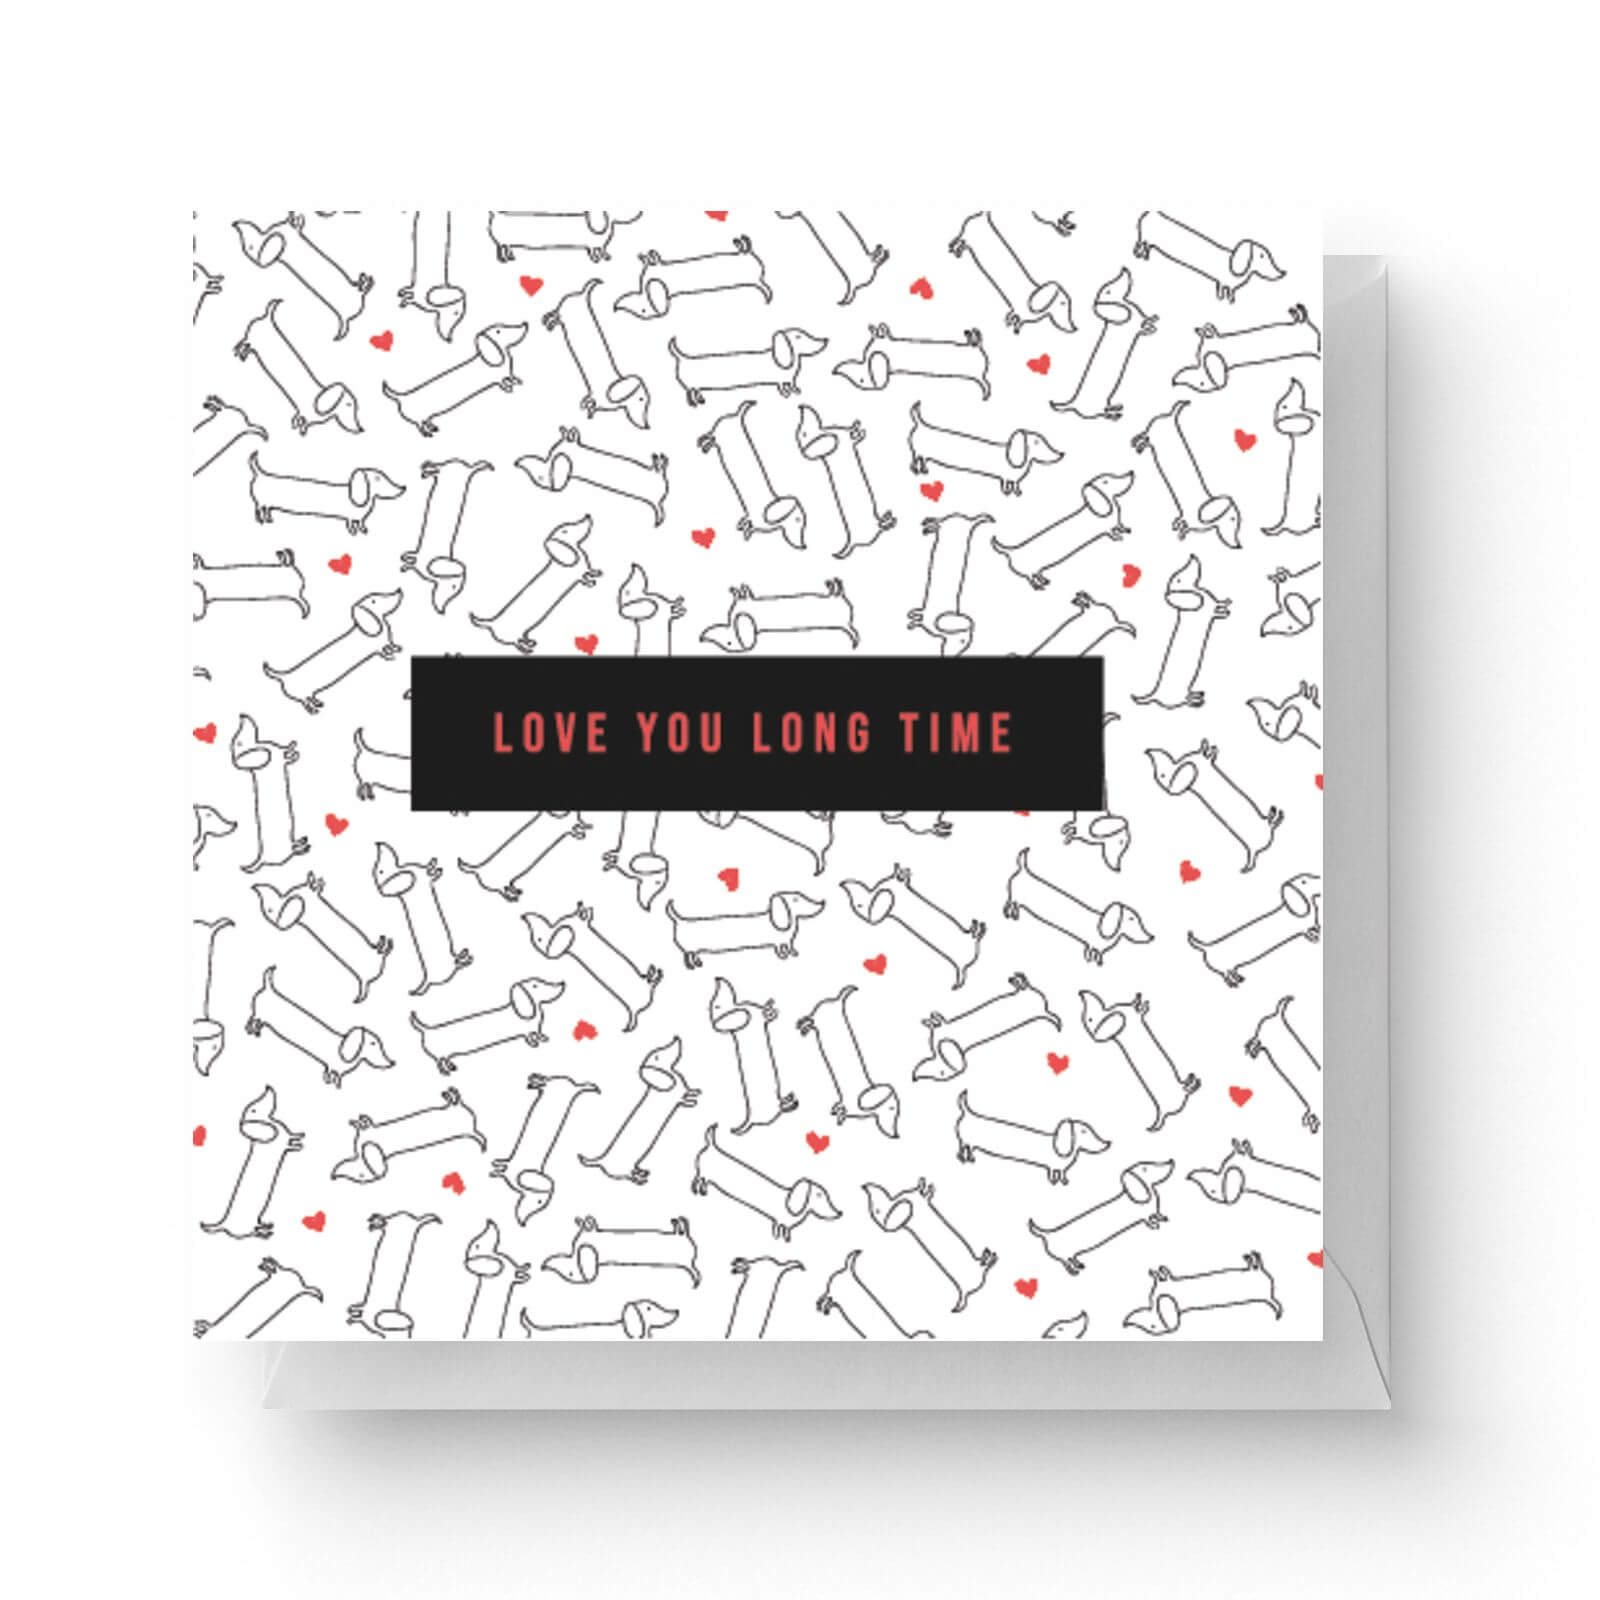 Love You Long Time Square Greetings Card 148cm X 148cm